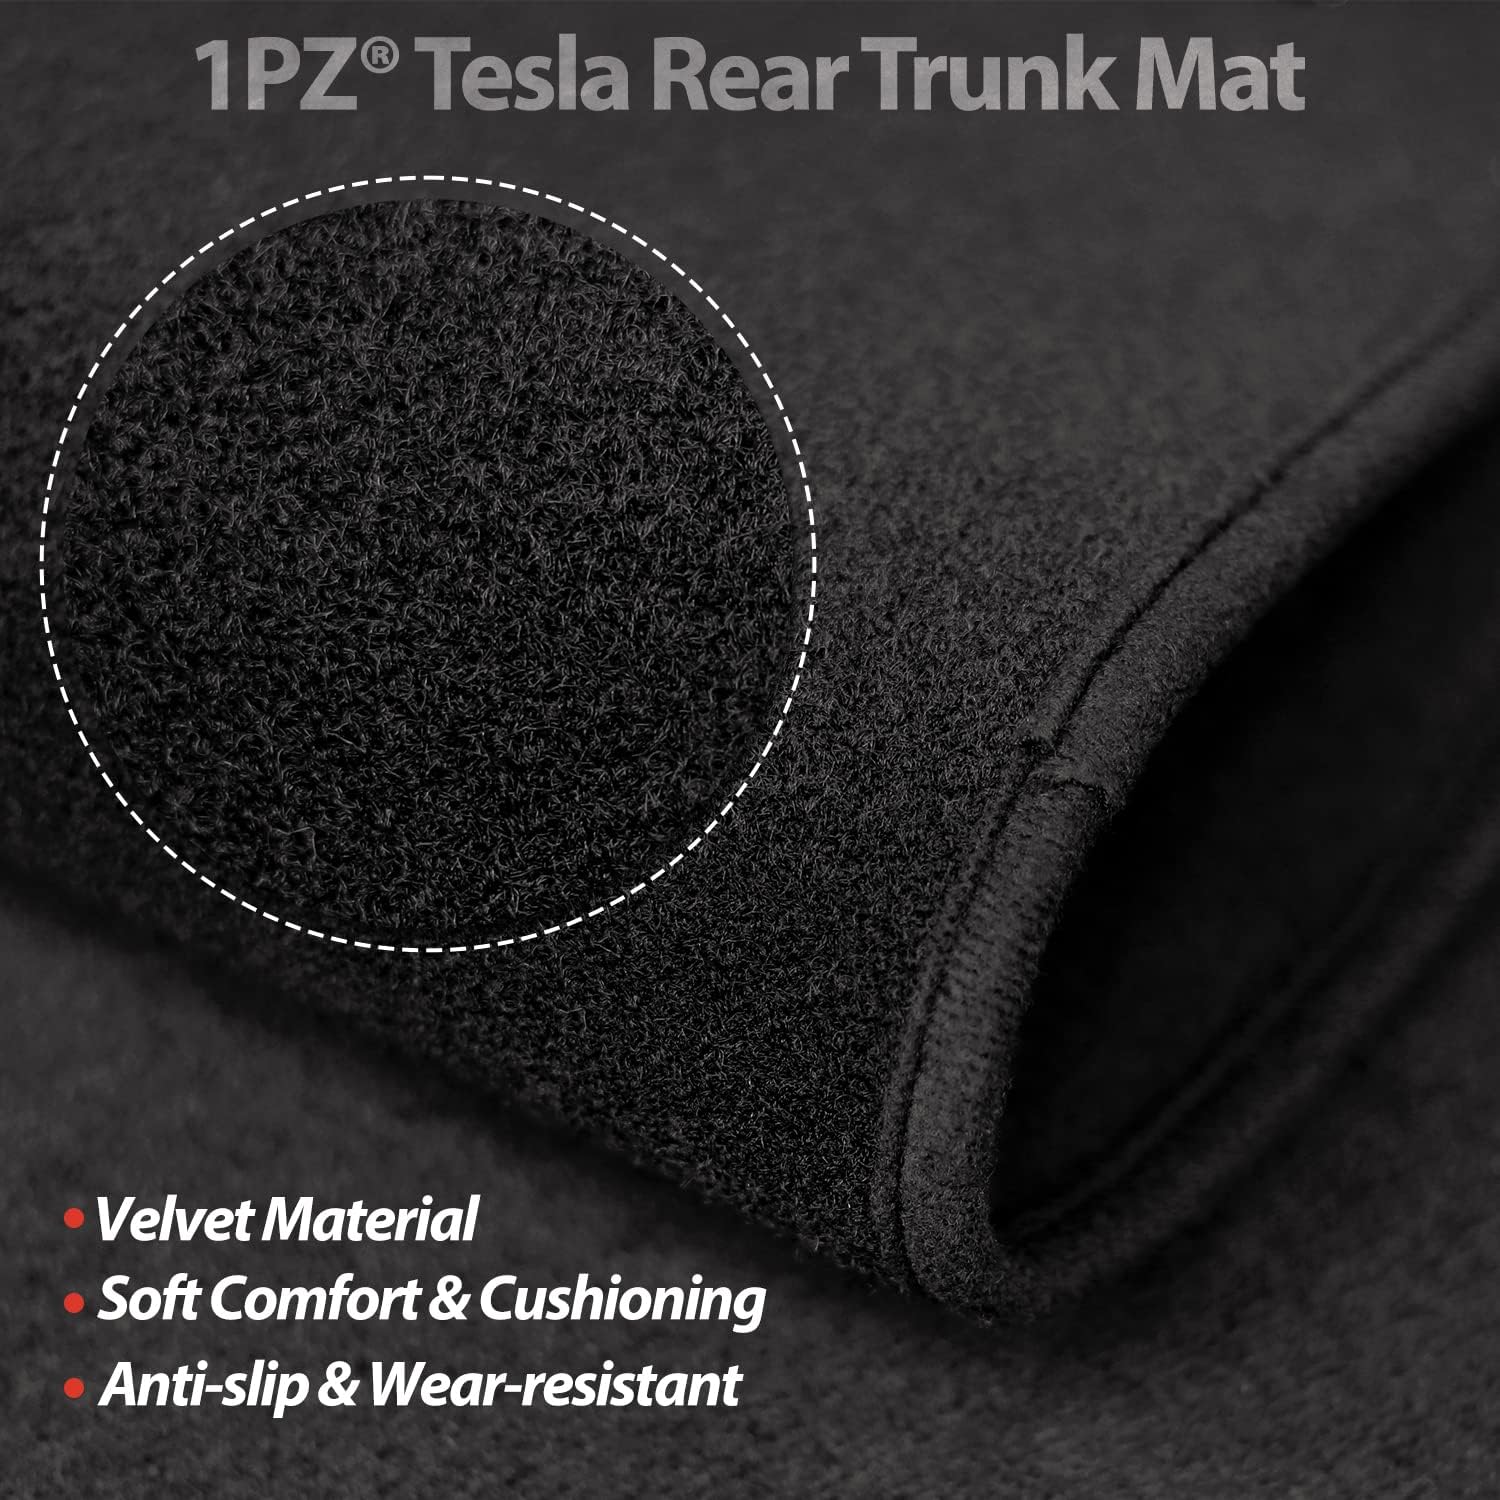 1PZ Black Cargo Liner Rear Trunk Mat Replacement for Tesla Model 3 2021 All Weather Heavy Duty Protection